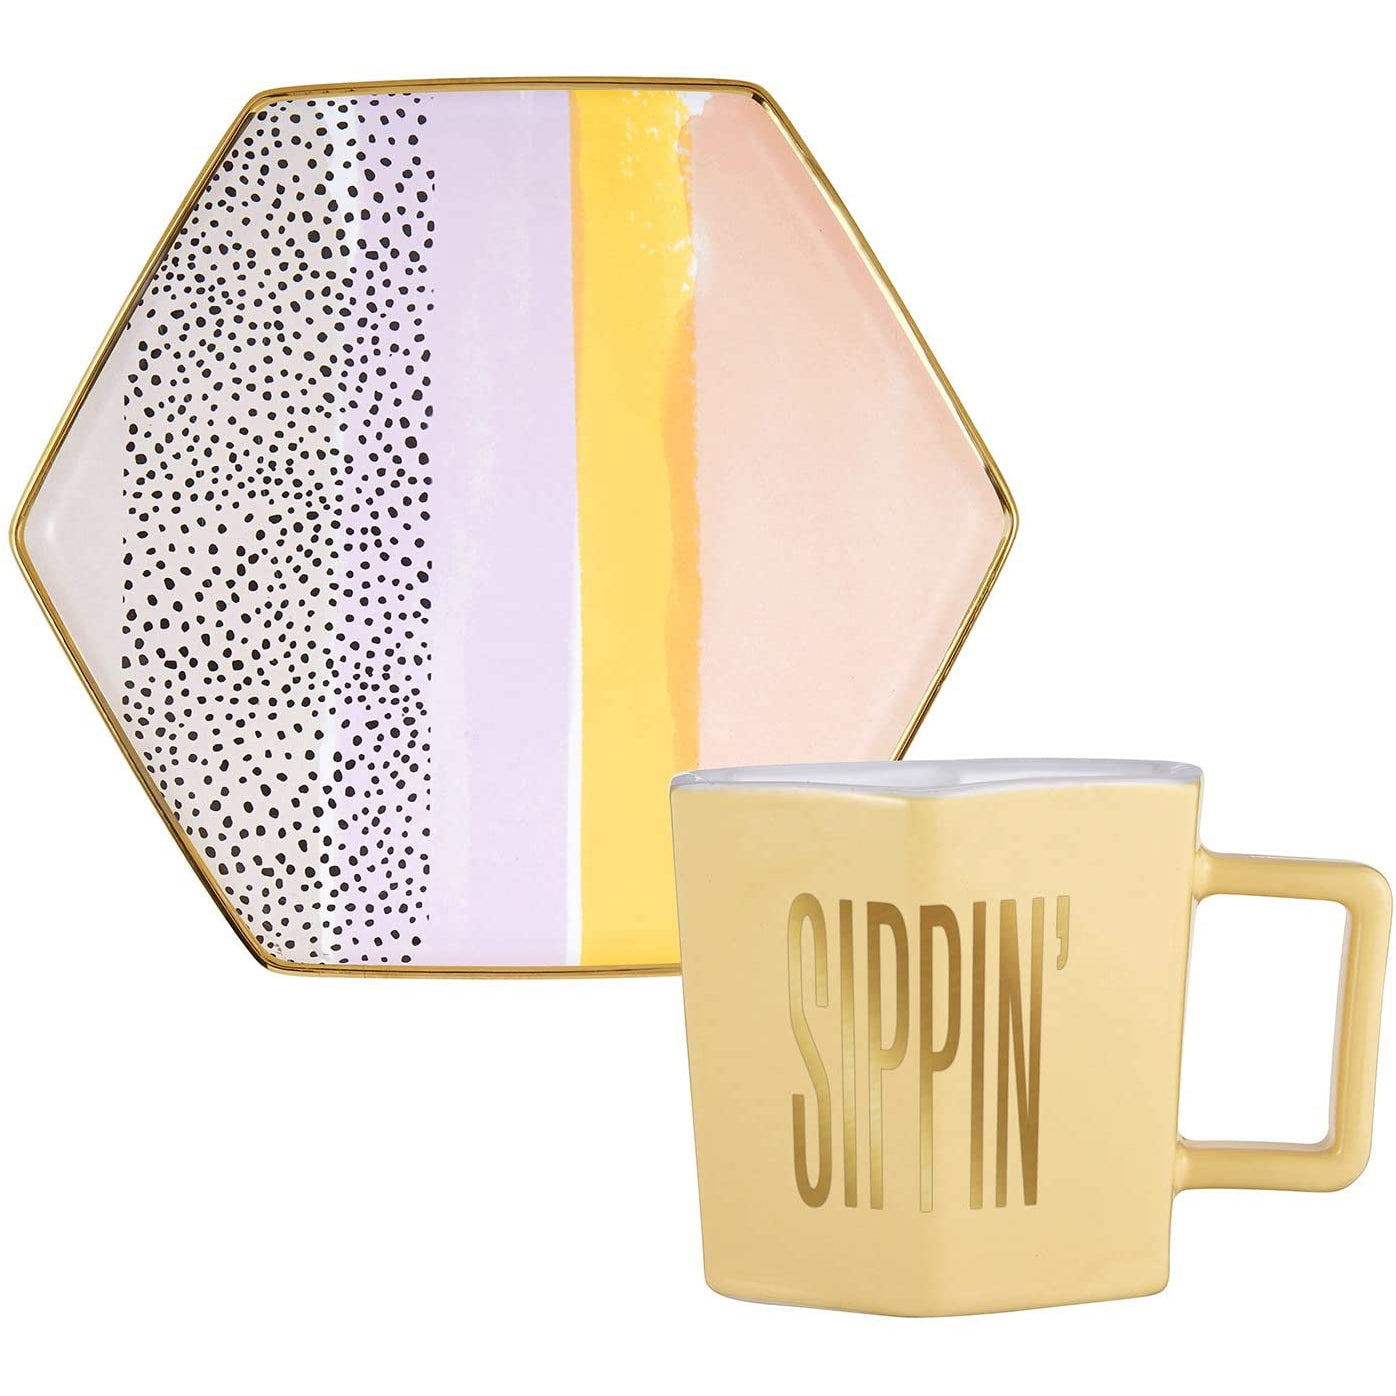 Sippin' Hexagon Mug and Saucer Set in Peach, Black Dot, and Honey